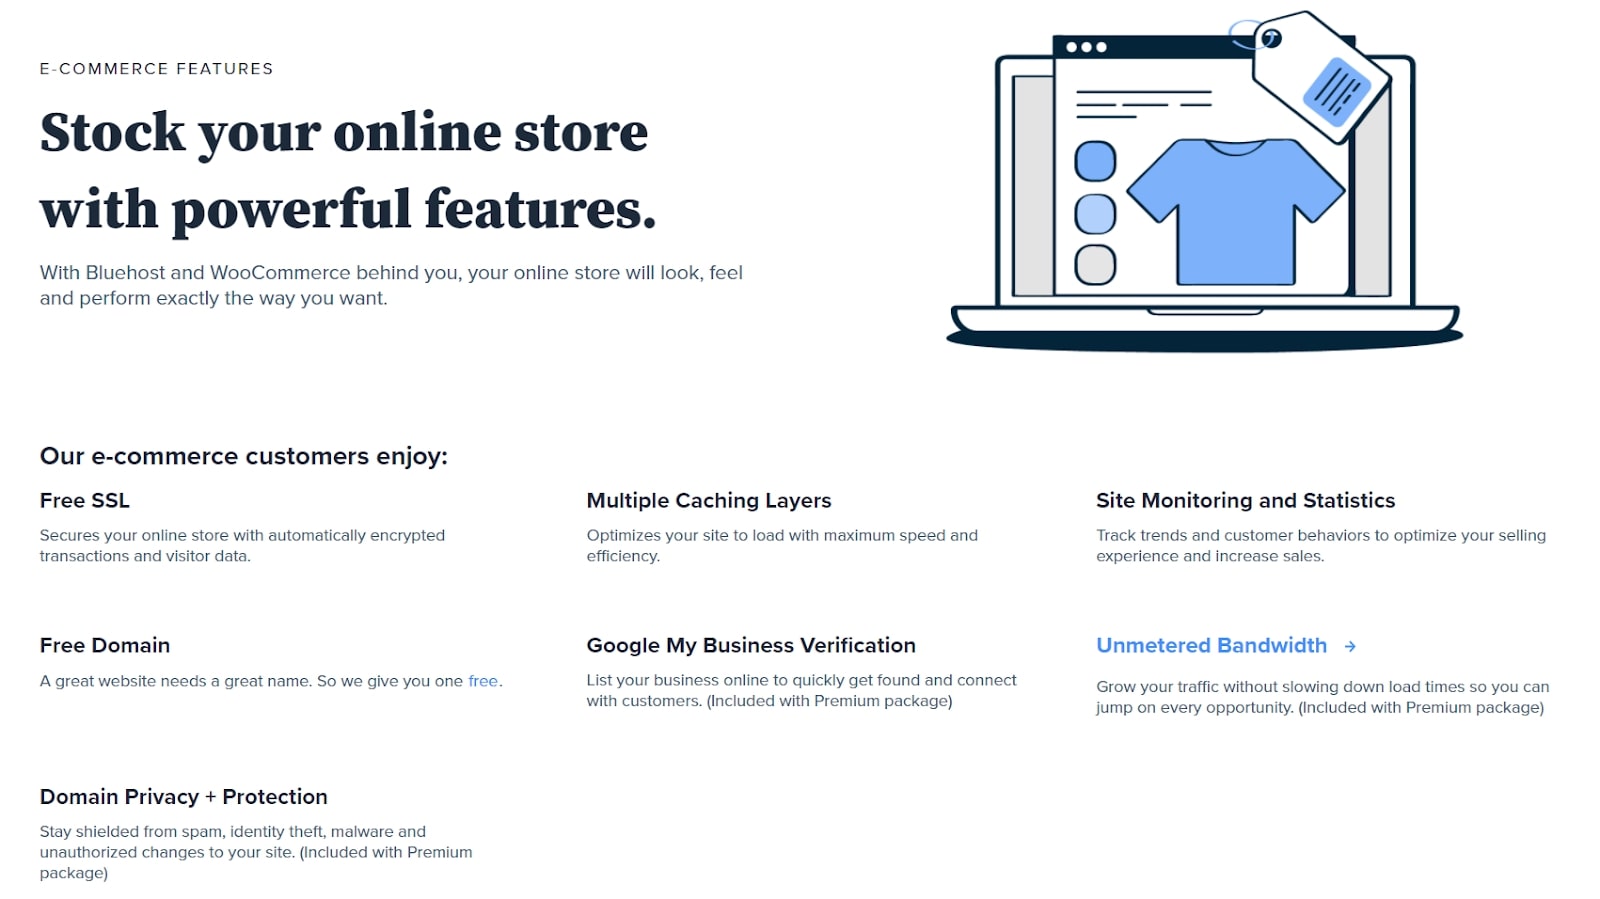 Bluehost's webpage discussing its WooCommerce online store plan